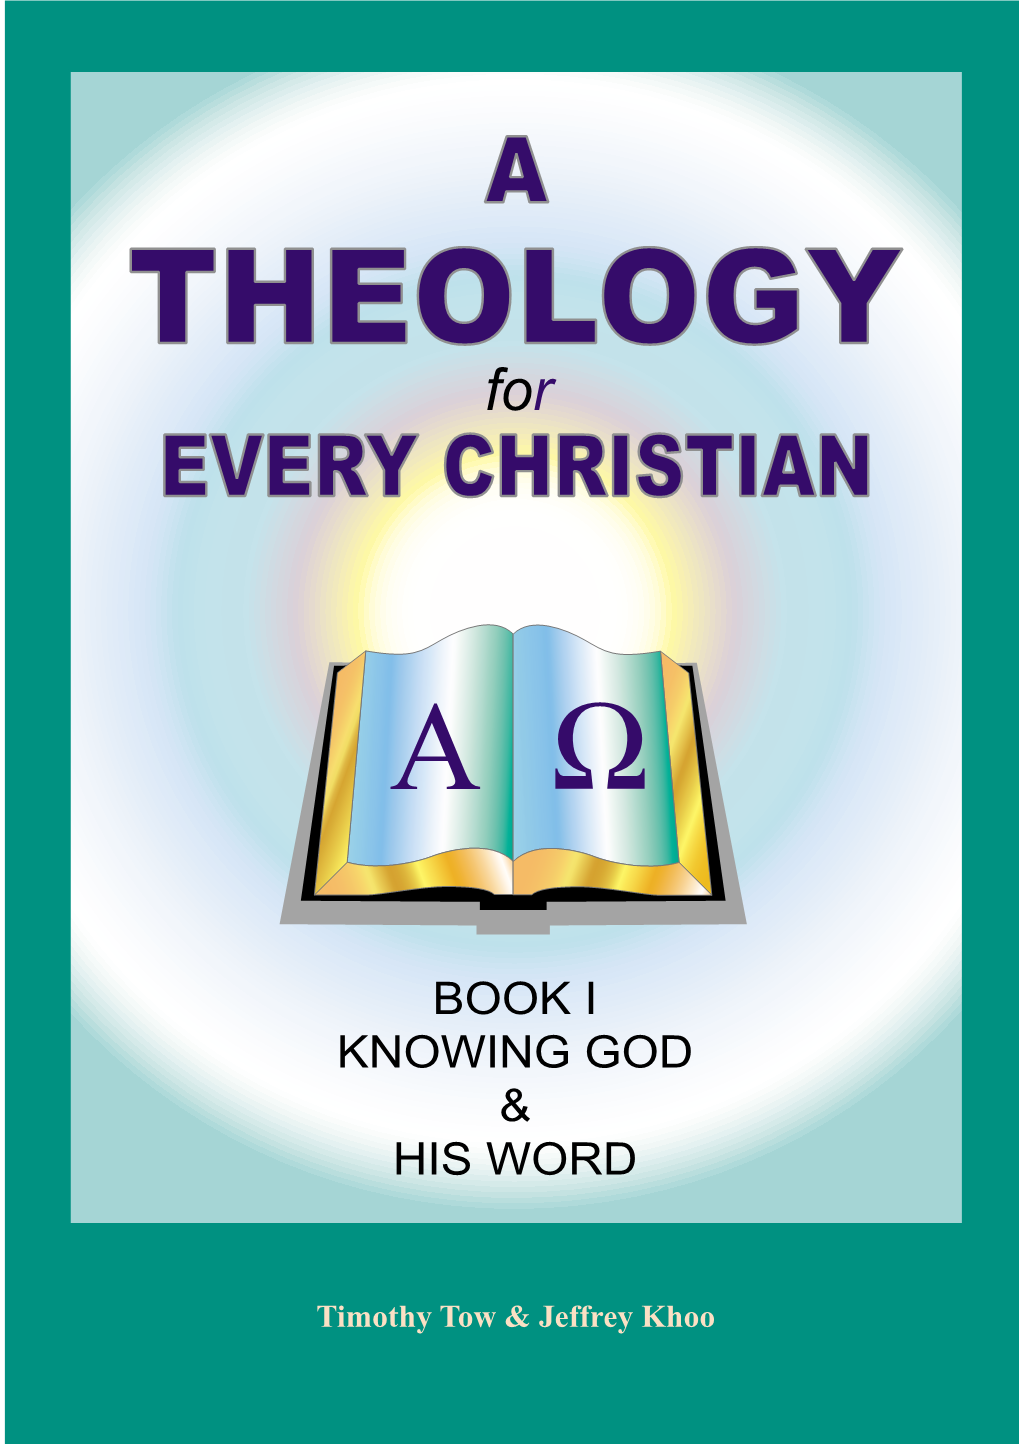 A THEOLOGY for EVERY CHRISTIAN